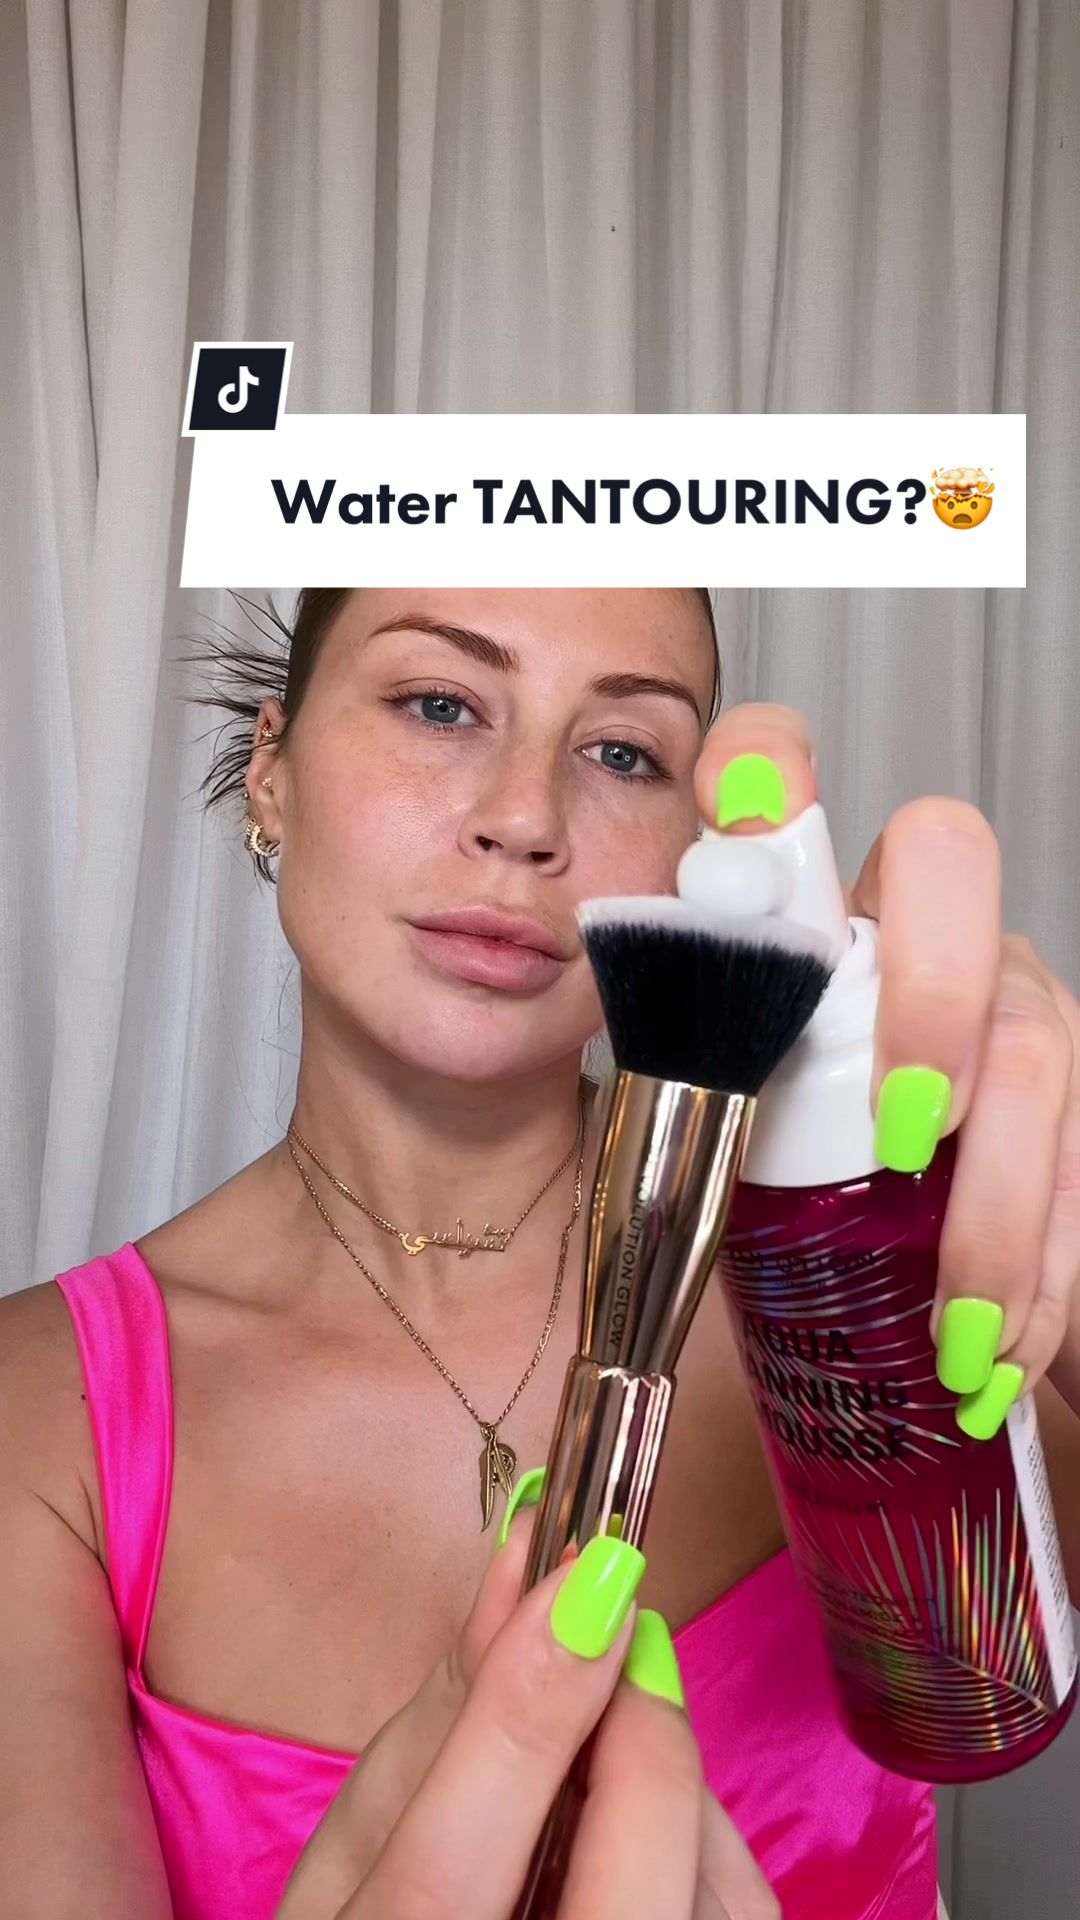 @Water TANtouring!? so this was the 3rd time trying @makeupre...